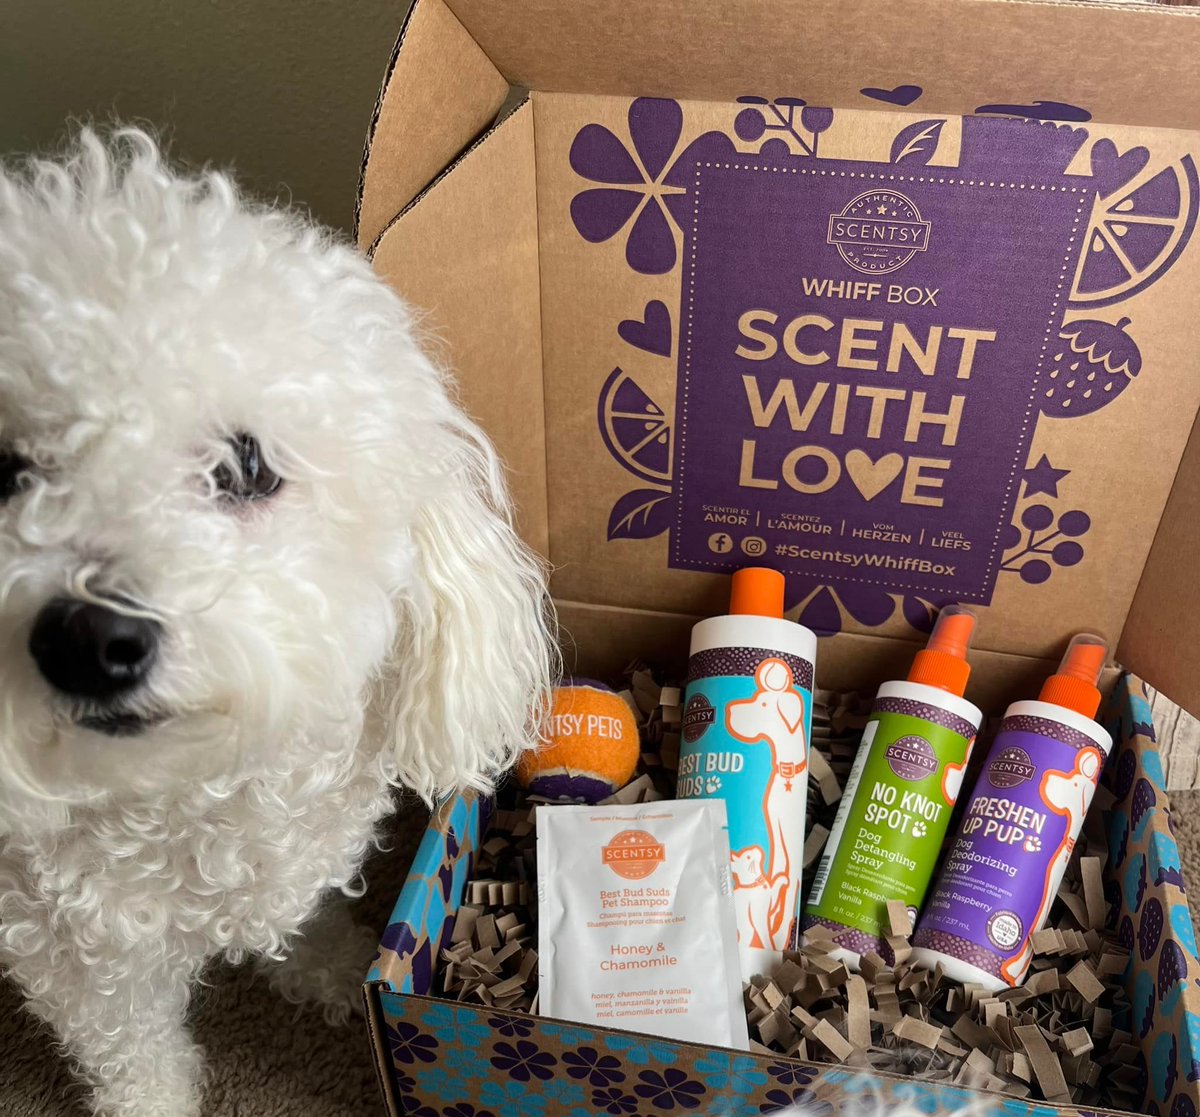 One of the Top 9 sellers in April!
🐕 Woof Box🐕
lisavaughn.scentsy.us/party/18196125…
🐩Jammy Time Best Bud Suds Pet Shampoo
🦮Jammy Time Freshen Up Pup Dog Deodorizing Spray
🐕‍🦺Jammy Time No Knot Spot Dog Detangling Spray
🐶UFO Scentsy Pet Toy
#dogs #dogsarefamily #pets #AnimalLovers